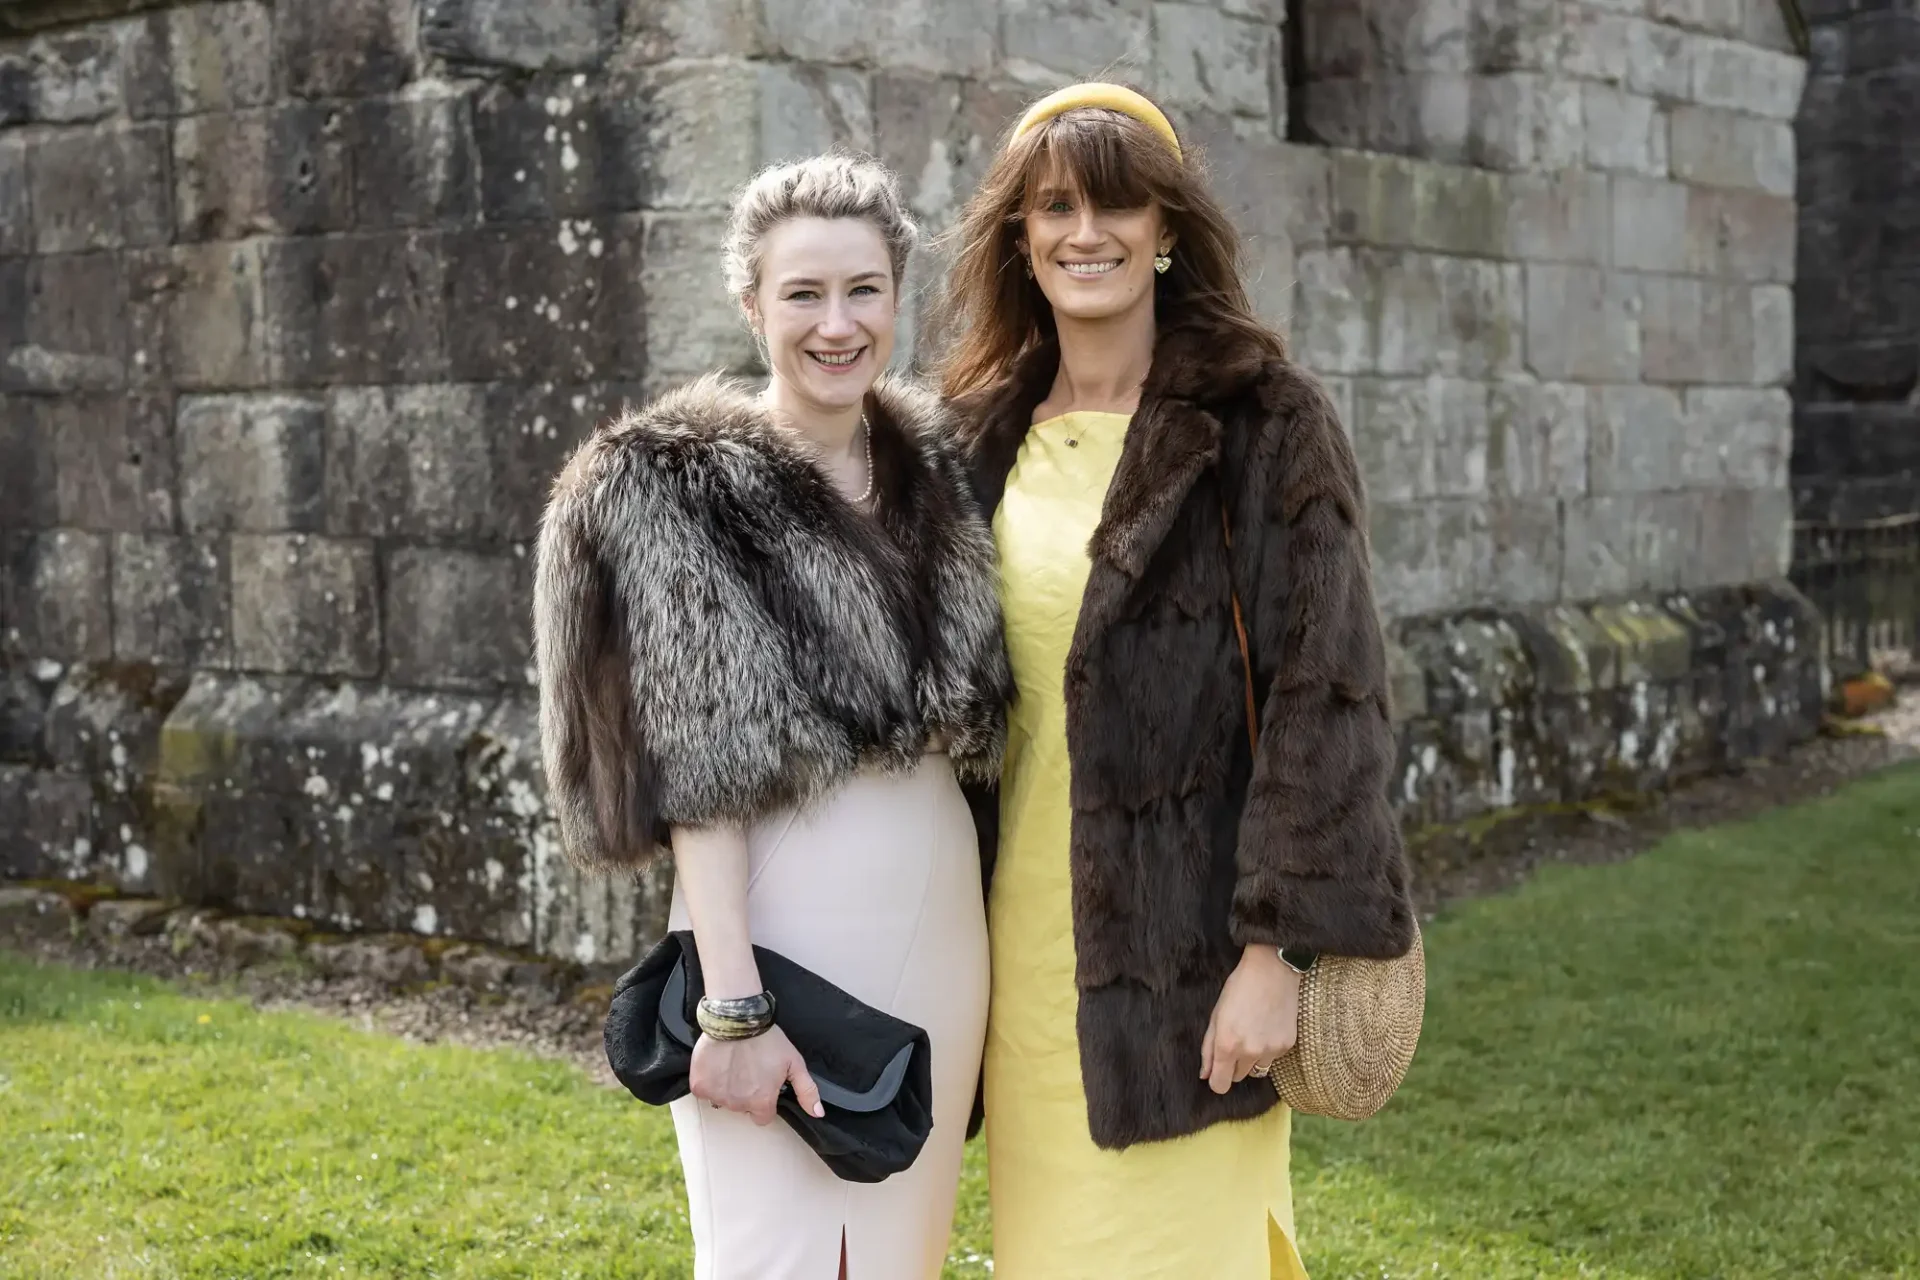 Two women stand outdoors in front of a stone wall, both wearing fur coats and smiling. One woman wears a pink dress and holds a clutch, the other wears a yellow dress and holds a woven bag.